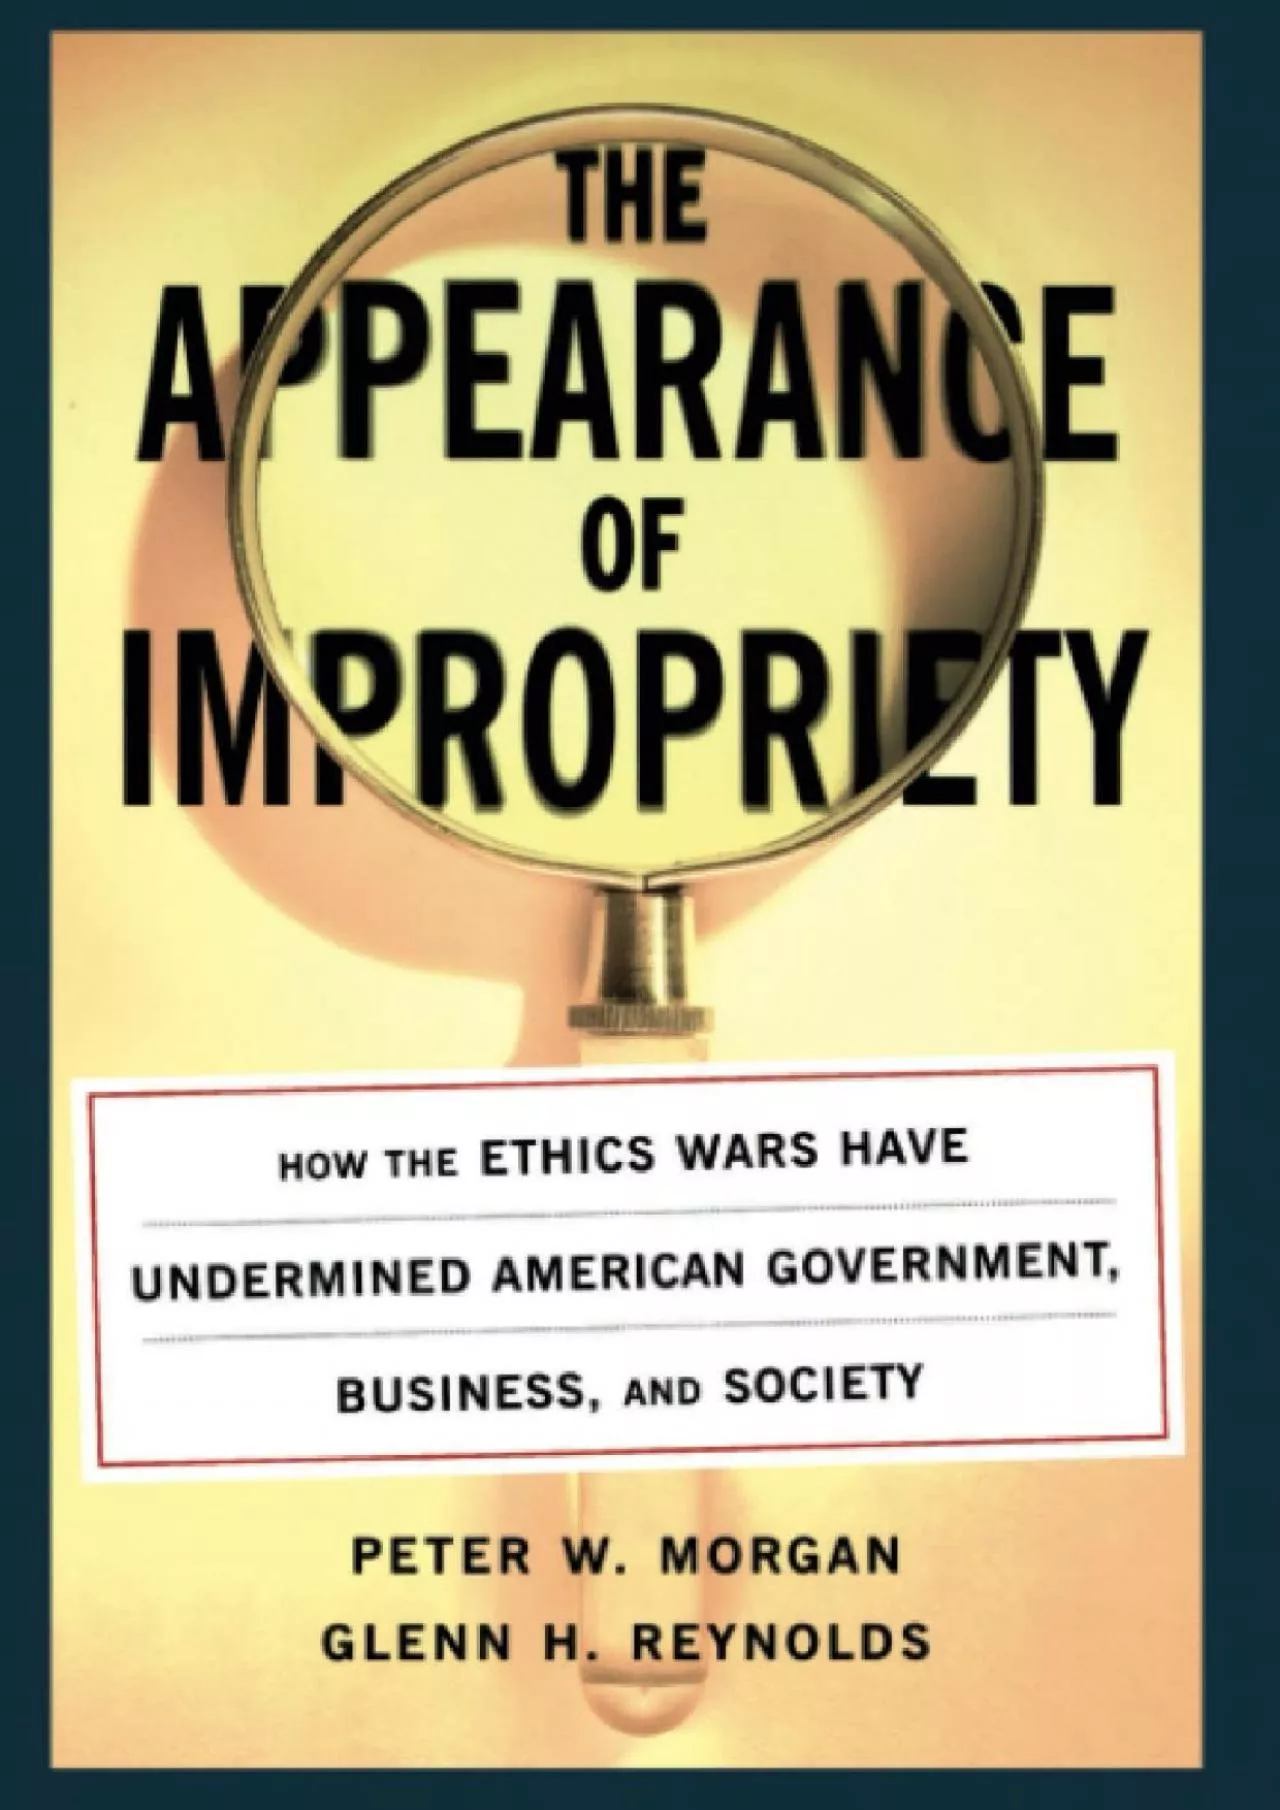 (BOOS)-The Appearance of Impropriety: How the Ethics Wars Have Undermined American Government,